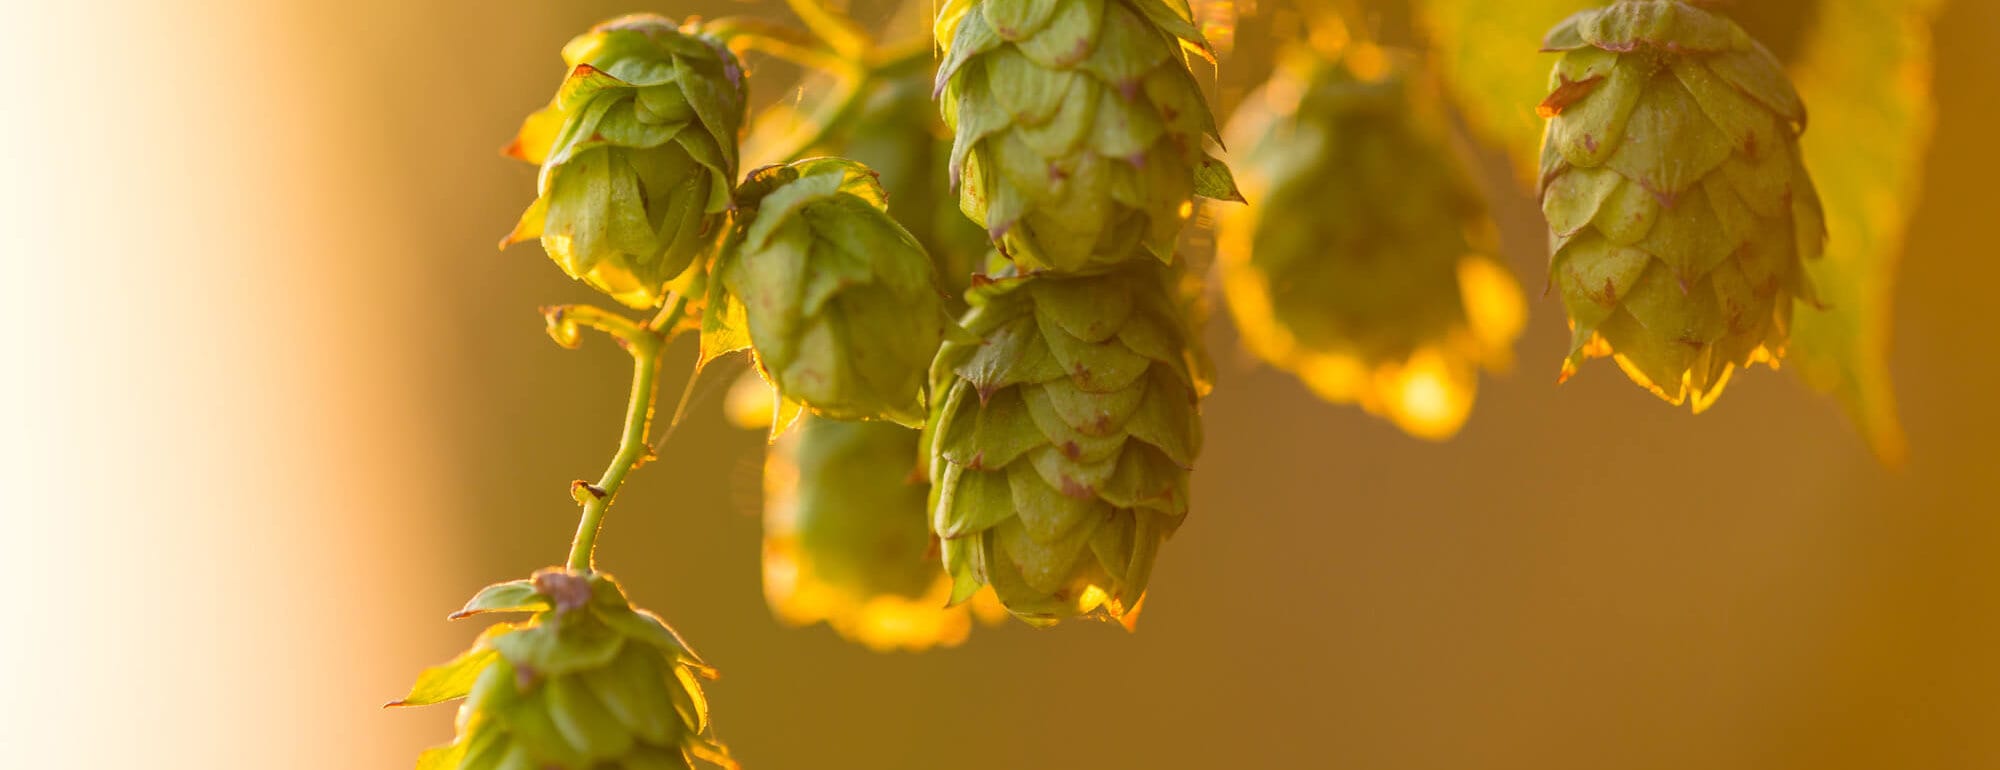 Close-up of hops plant